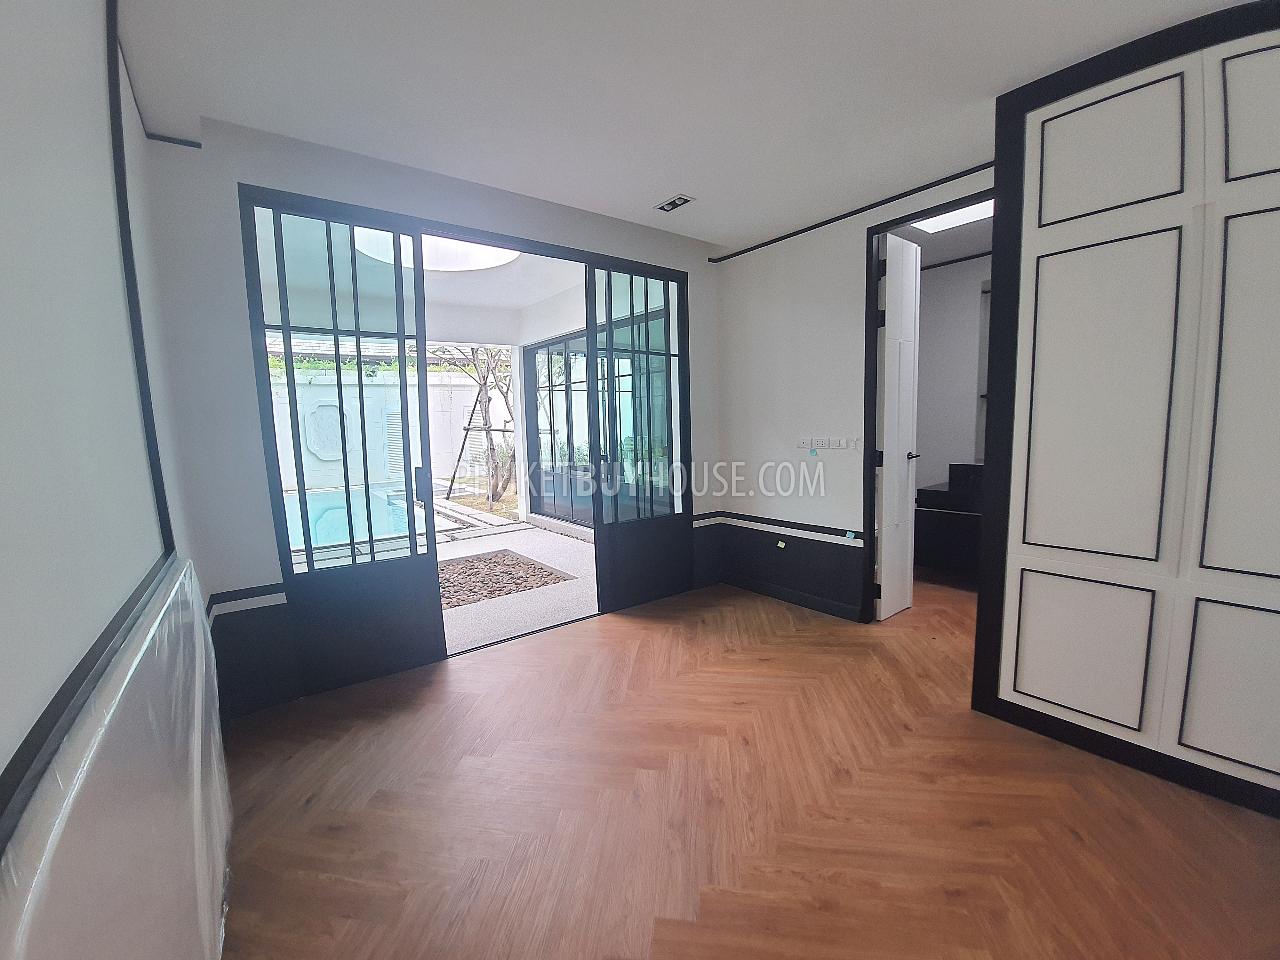 BAN6282: New Villa with 3 Bedrooms and Private Pool in a Convenient Area near Bang Tao. Photo #38